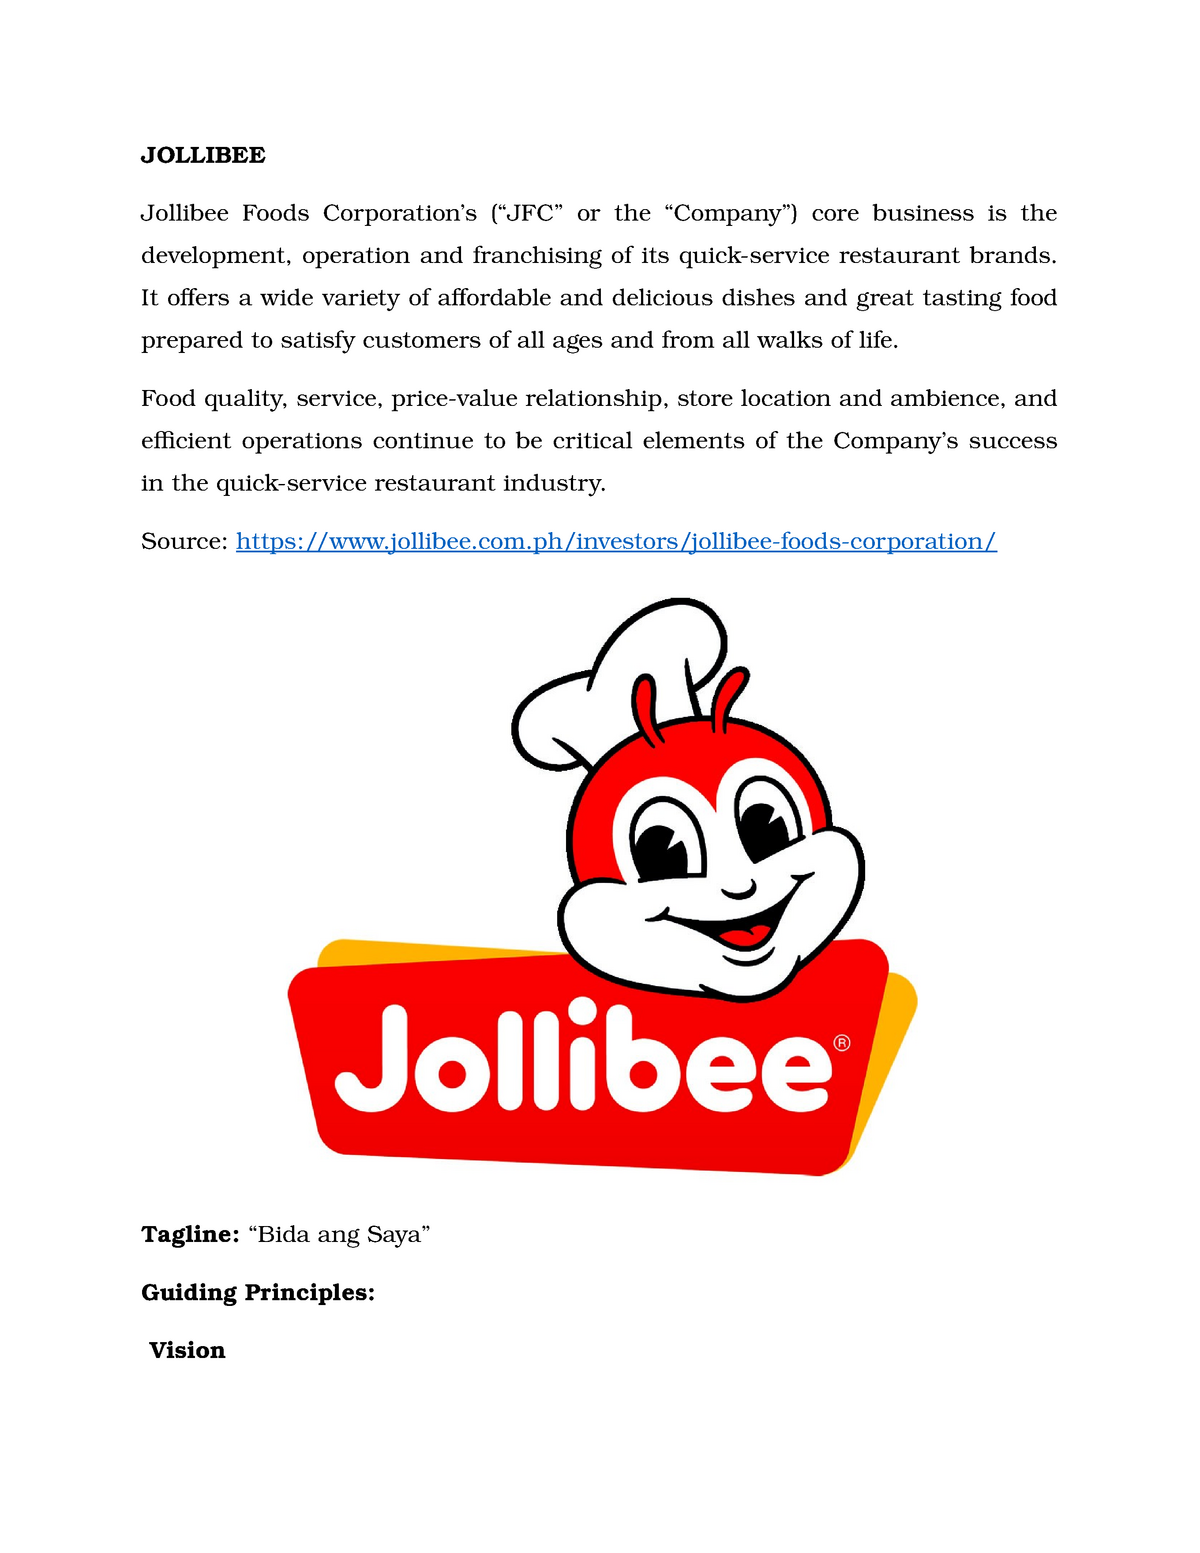 resume objective examples for jollibee